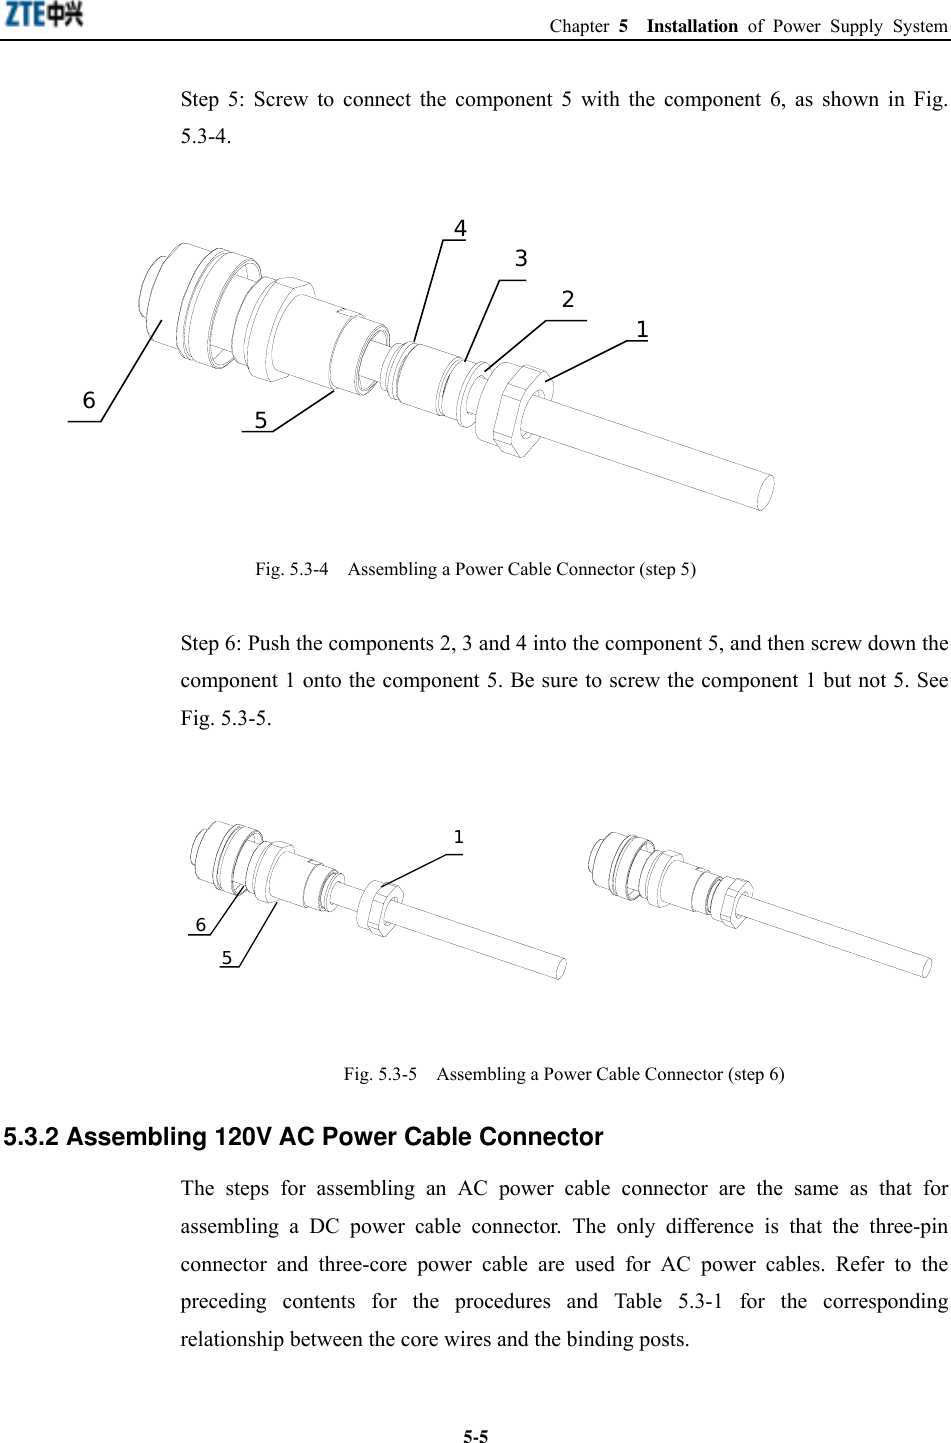  Chapter 5  Installation of Power Supply System  5-5Step 5: Screw to connect the component 5 with the component 6, as shown in Fig. 5.3-4. 123546 Fig. 5.3-4    Assembling a Power Cable Connector (step 5) Step 6: Push the components 2, 3 and 4 into the component 5, and then screw down the component 1 onto the component 5. Be sure to screw the component 1 but not 5. See Fig. 5.3-5. 156 Fig. 5.3-5    Assembling a Power Cable Connector (step 6) 5.3.2 Assembling 120V AC Power Cable Connector The steps for assembling an AC power cable connector are the same as that for assembling a DC power cable connector. The only difference is that the three-pin connector and three-core power cable are used for AC power cables. Refer to the preceding contents for the procedures and Table 5.3-1 for the corresponding relationship between the core wires and the binding posts.  